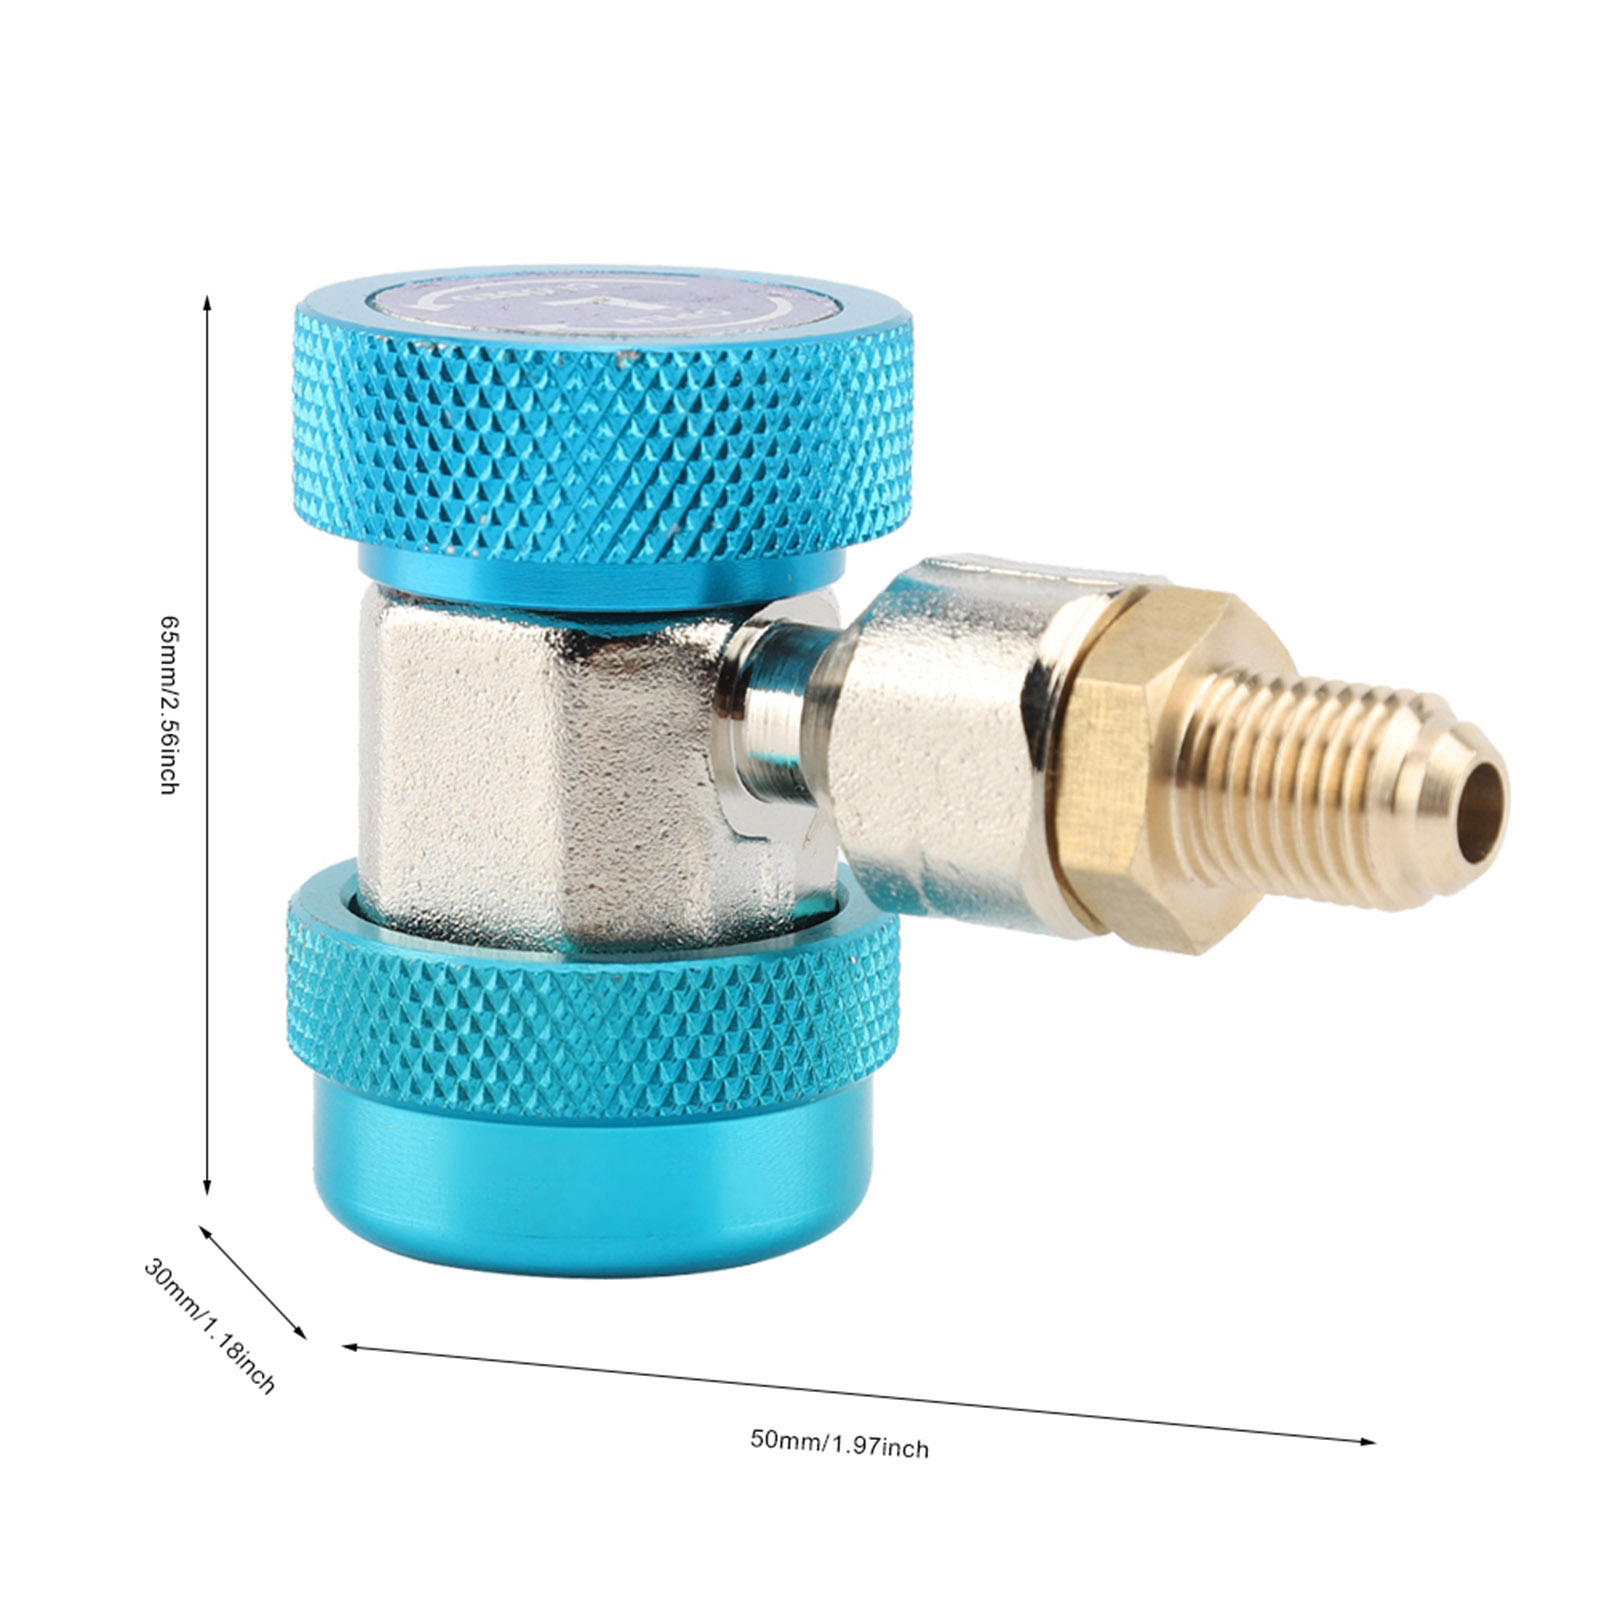 R134 Quick Coupler Adapter, AC Low High Quick Connector Conditioning Extractor Valve Core, AC Hose Fittings[Blue low pressure] - image 2 of 9